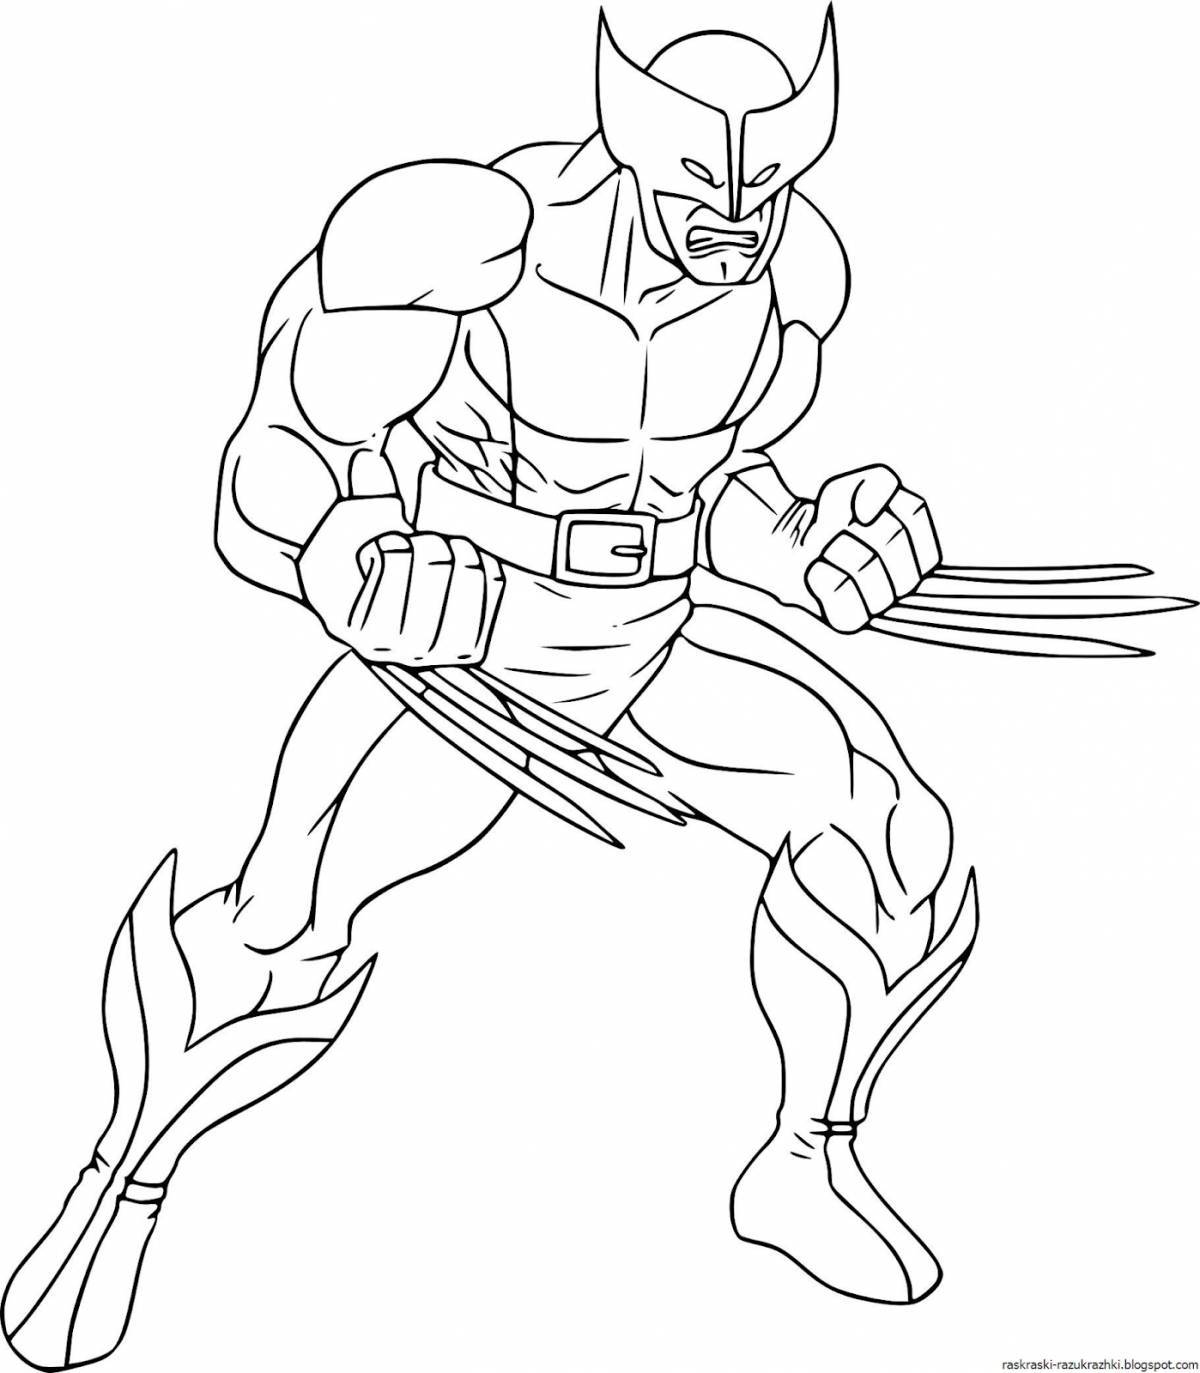 Fun superhero coloring pages for kids